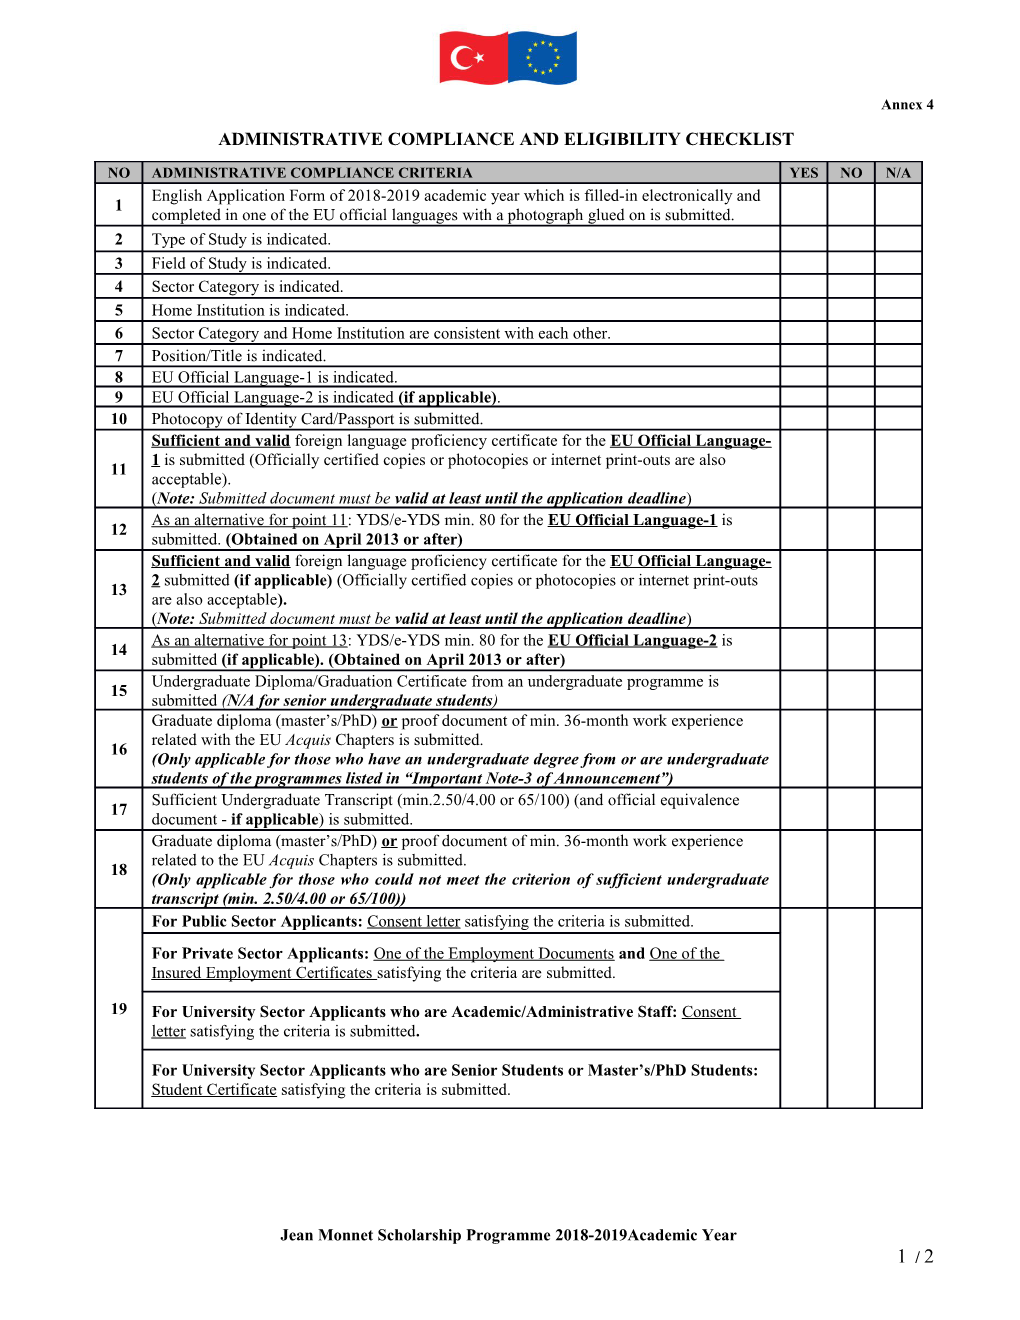 Administrative Compliance and Eligibility Checklist